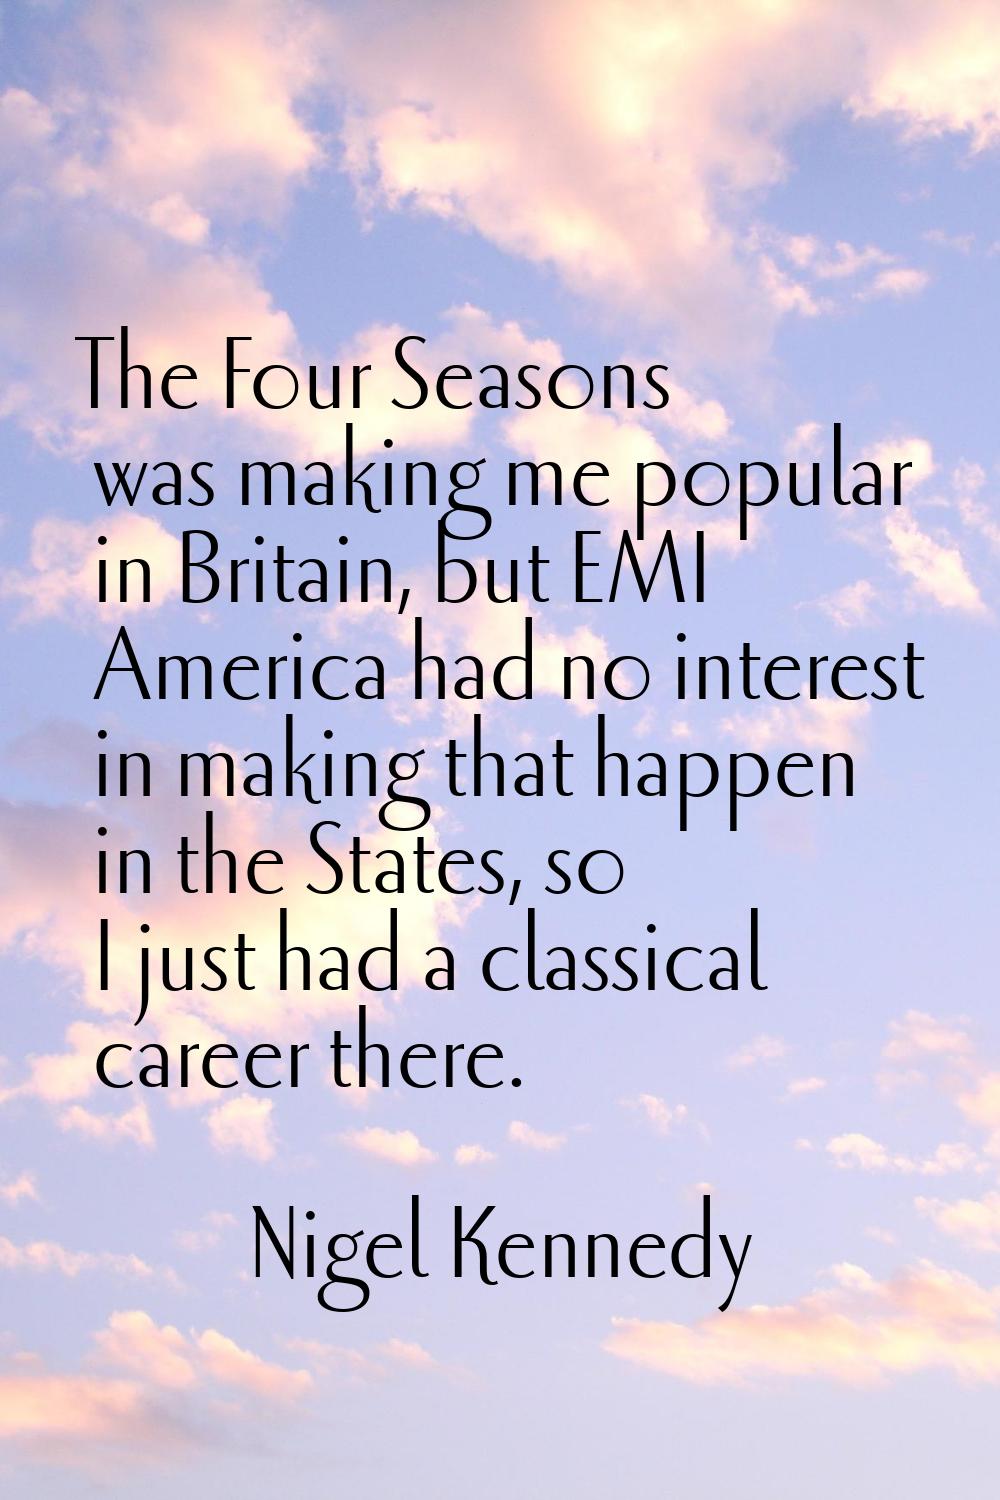 The Four Seasons was making me popular in Britain, but EMI America had no interest in making that h